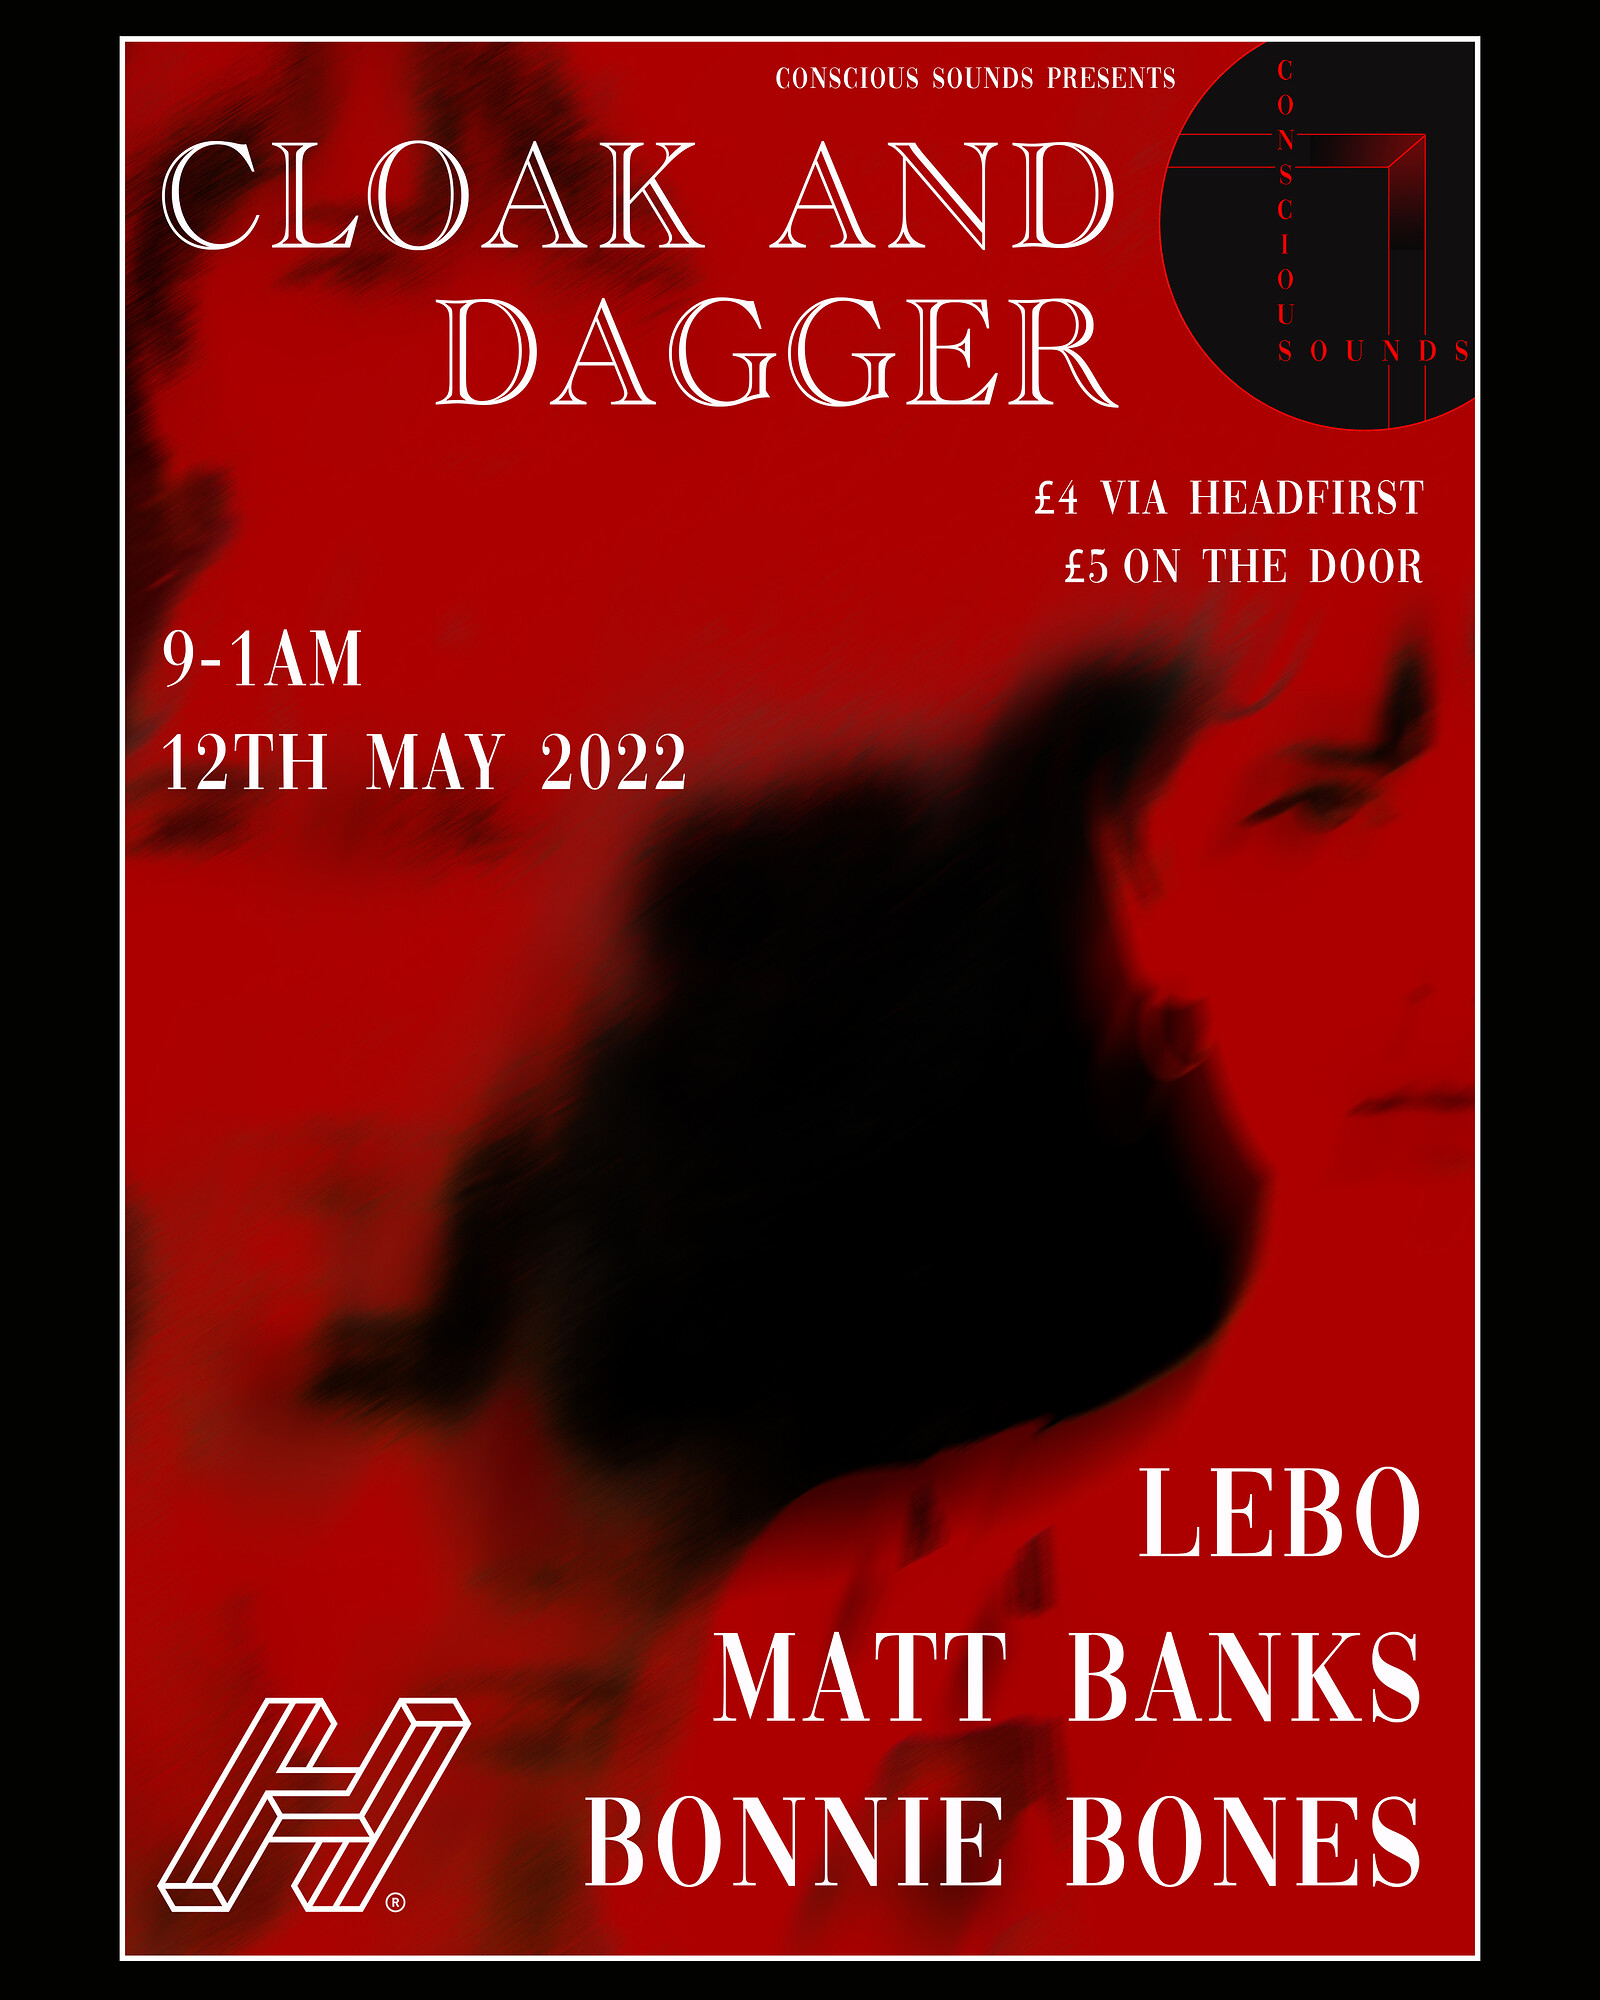 Conscious Sounds Presents- Lebo at The Cloak and Dagger